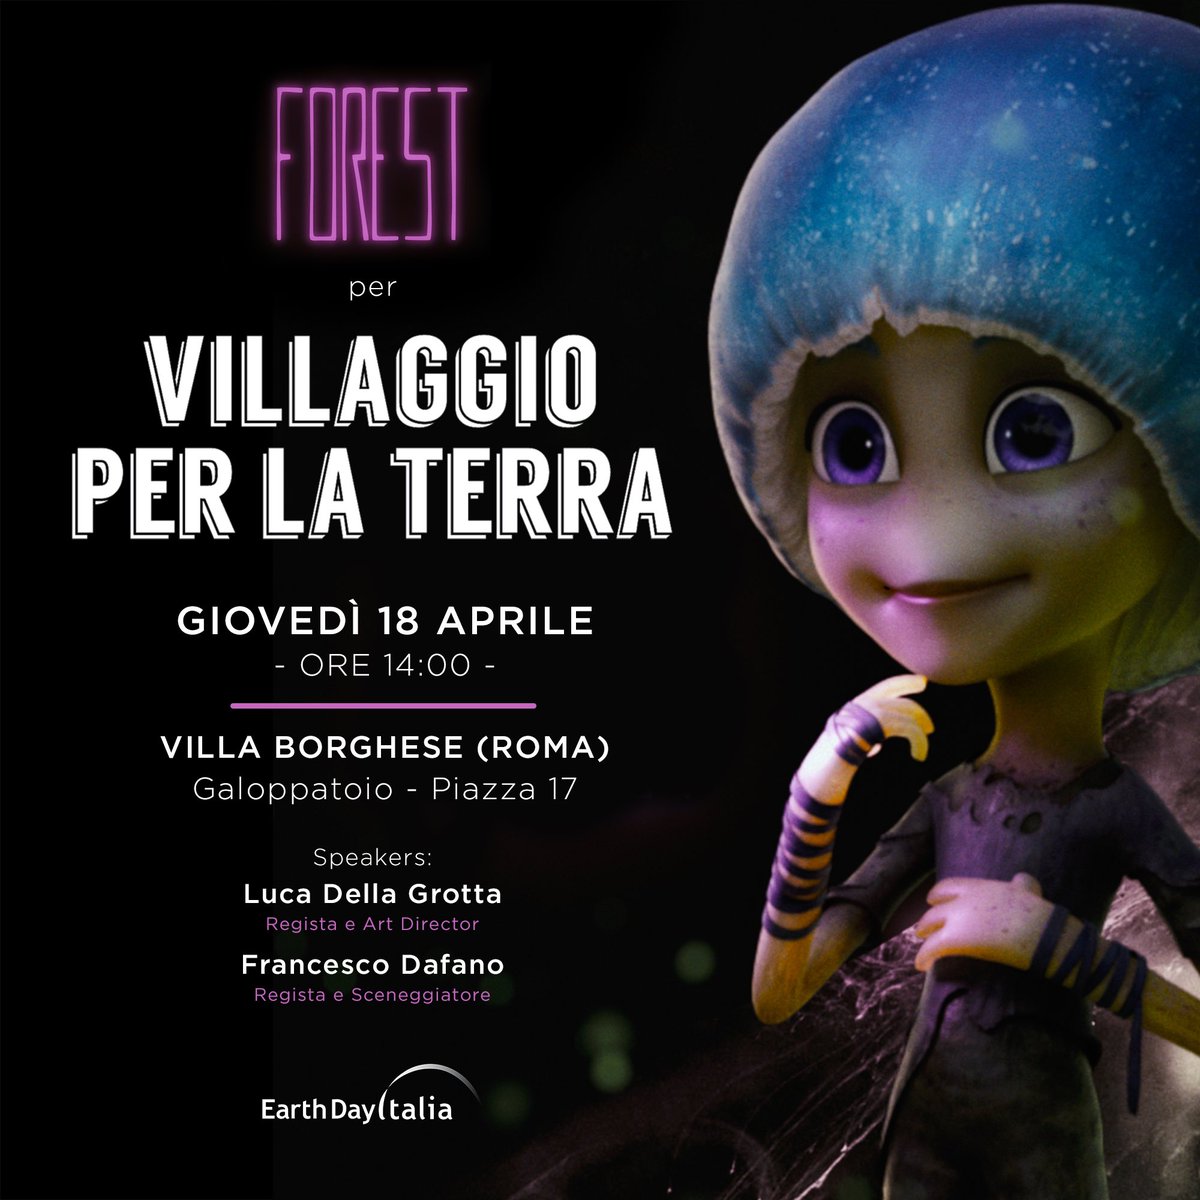 🌍 We're thrilled to present our talk “Designing a Sustainable Future through Animation' at #VillaggioPerLaTerra! 🎬 Join us to showcase @forest_themovie with our directors Luca della Grotta & Francesco Dafano. 🌱 Thanks to @earthdayitalia & #PierluigiSassi for having us! 🙏